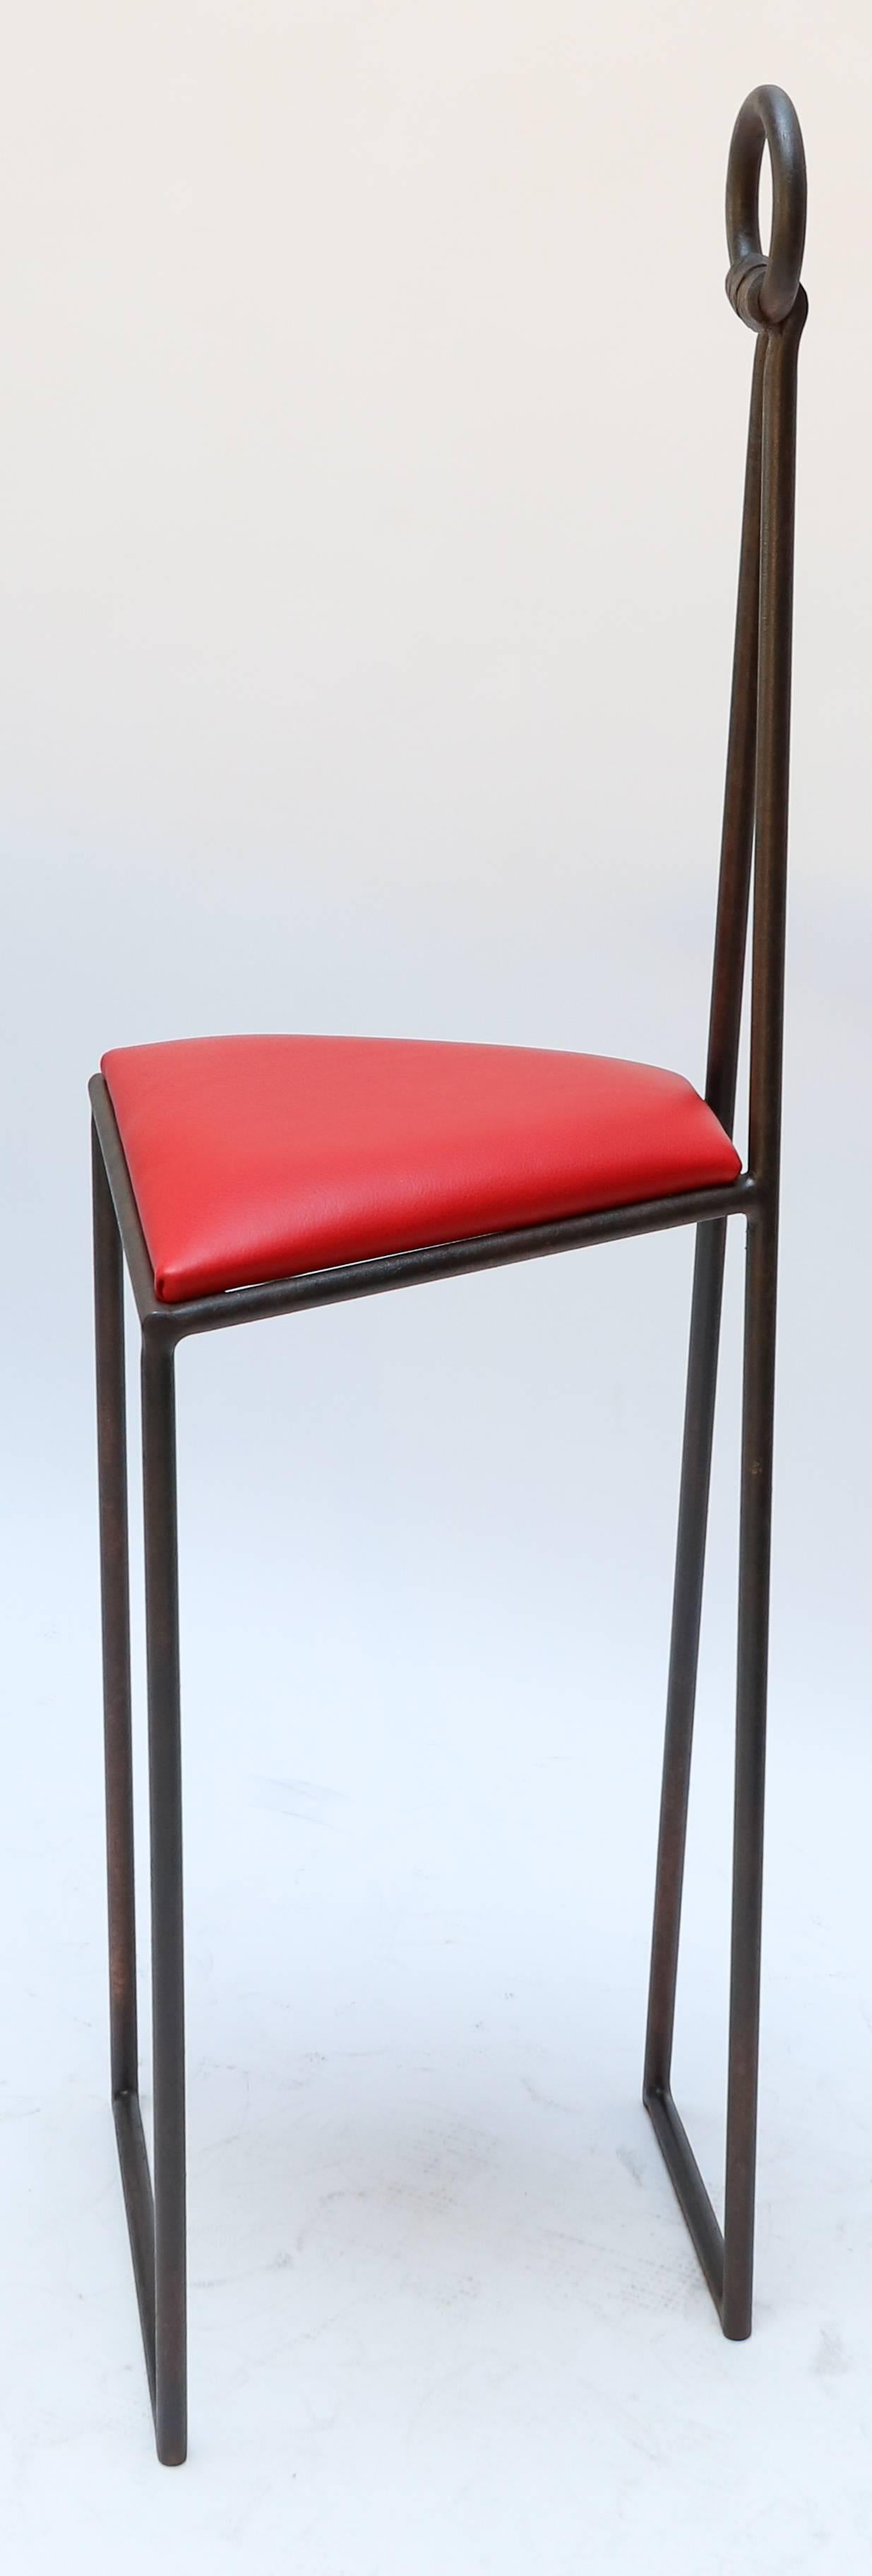 Mid-Century Modern Custom Iron Bar Stools with Red Leather Seats by Adesso Imports For Sale